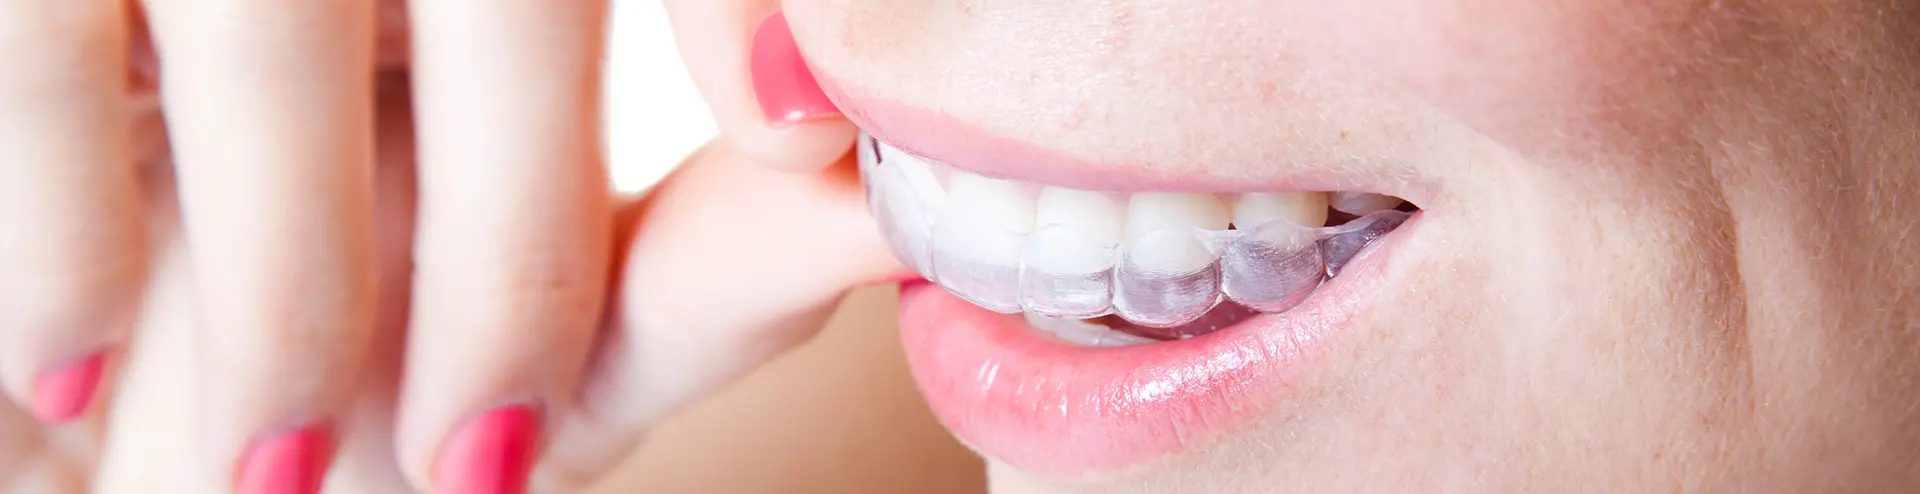 Invisalign vs Braces: Which Choice is Right for You? - Arrow Smile